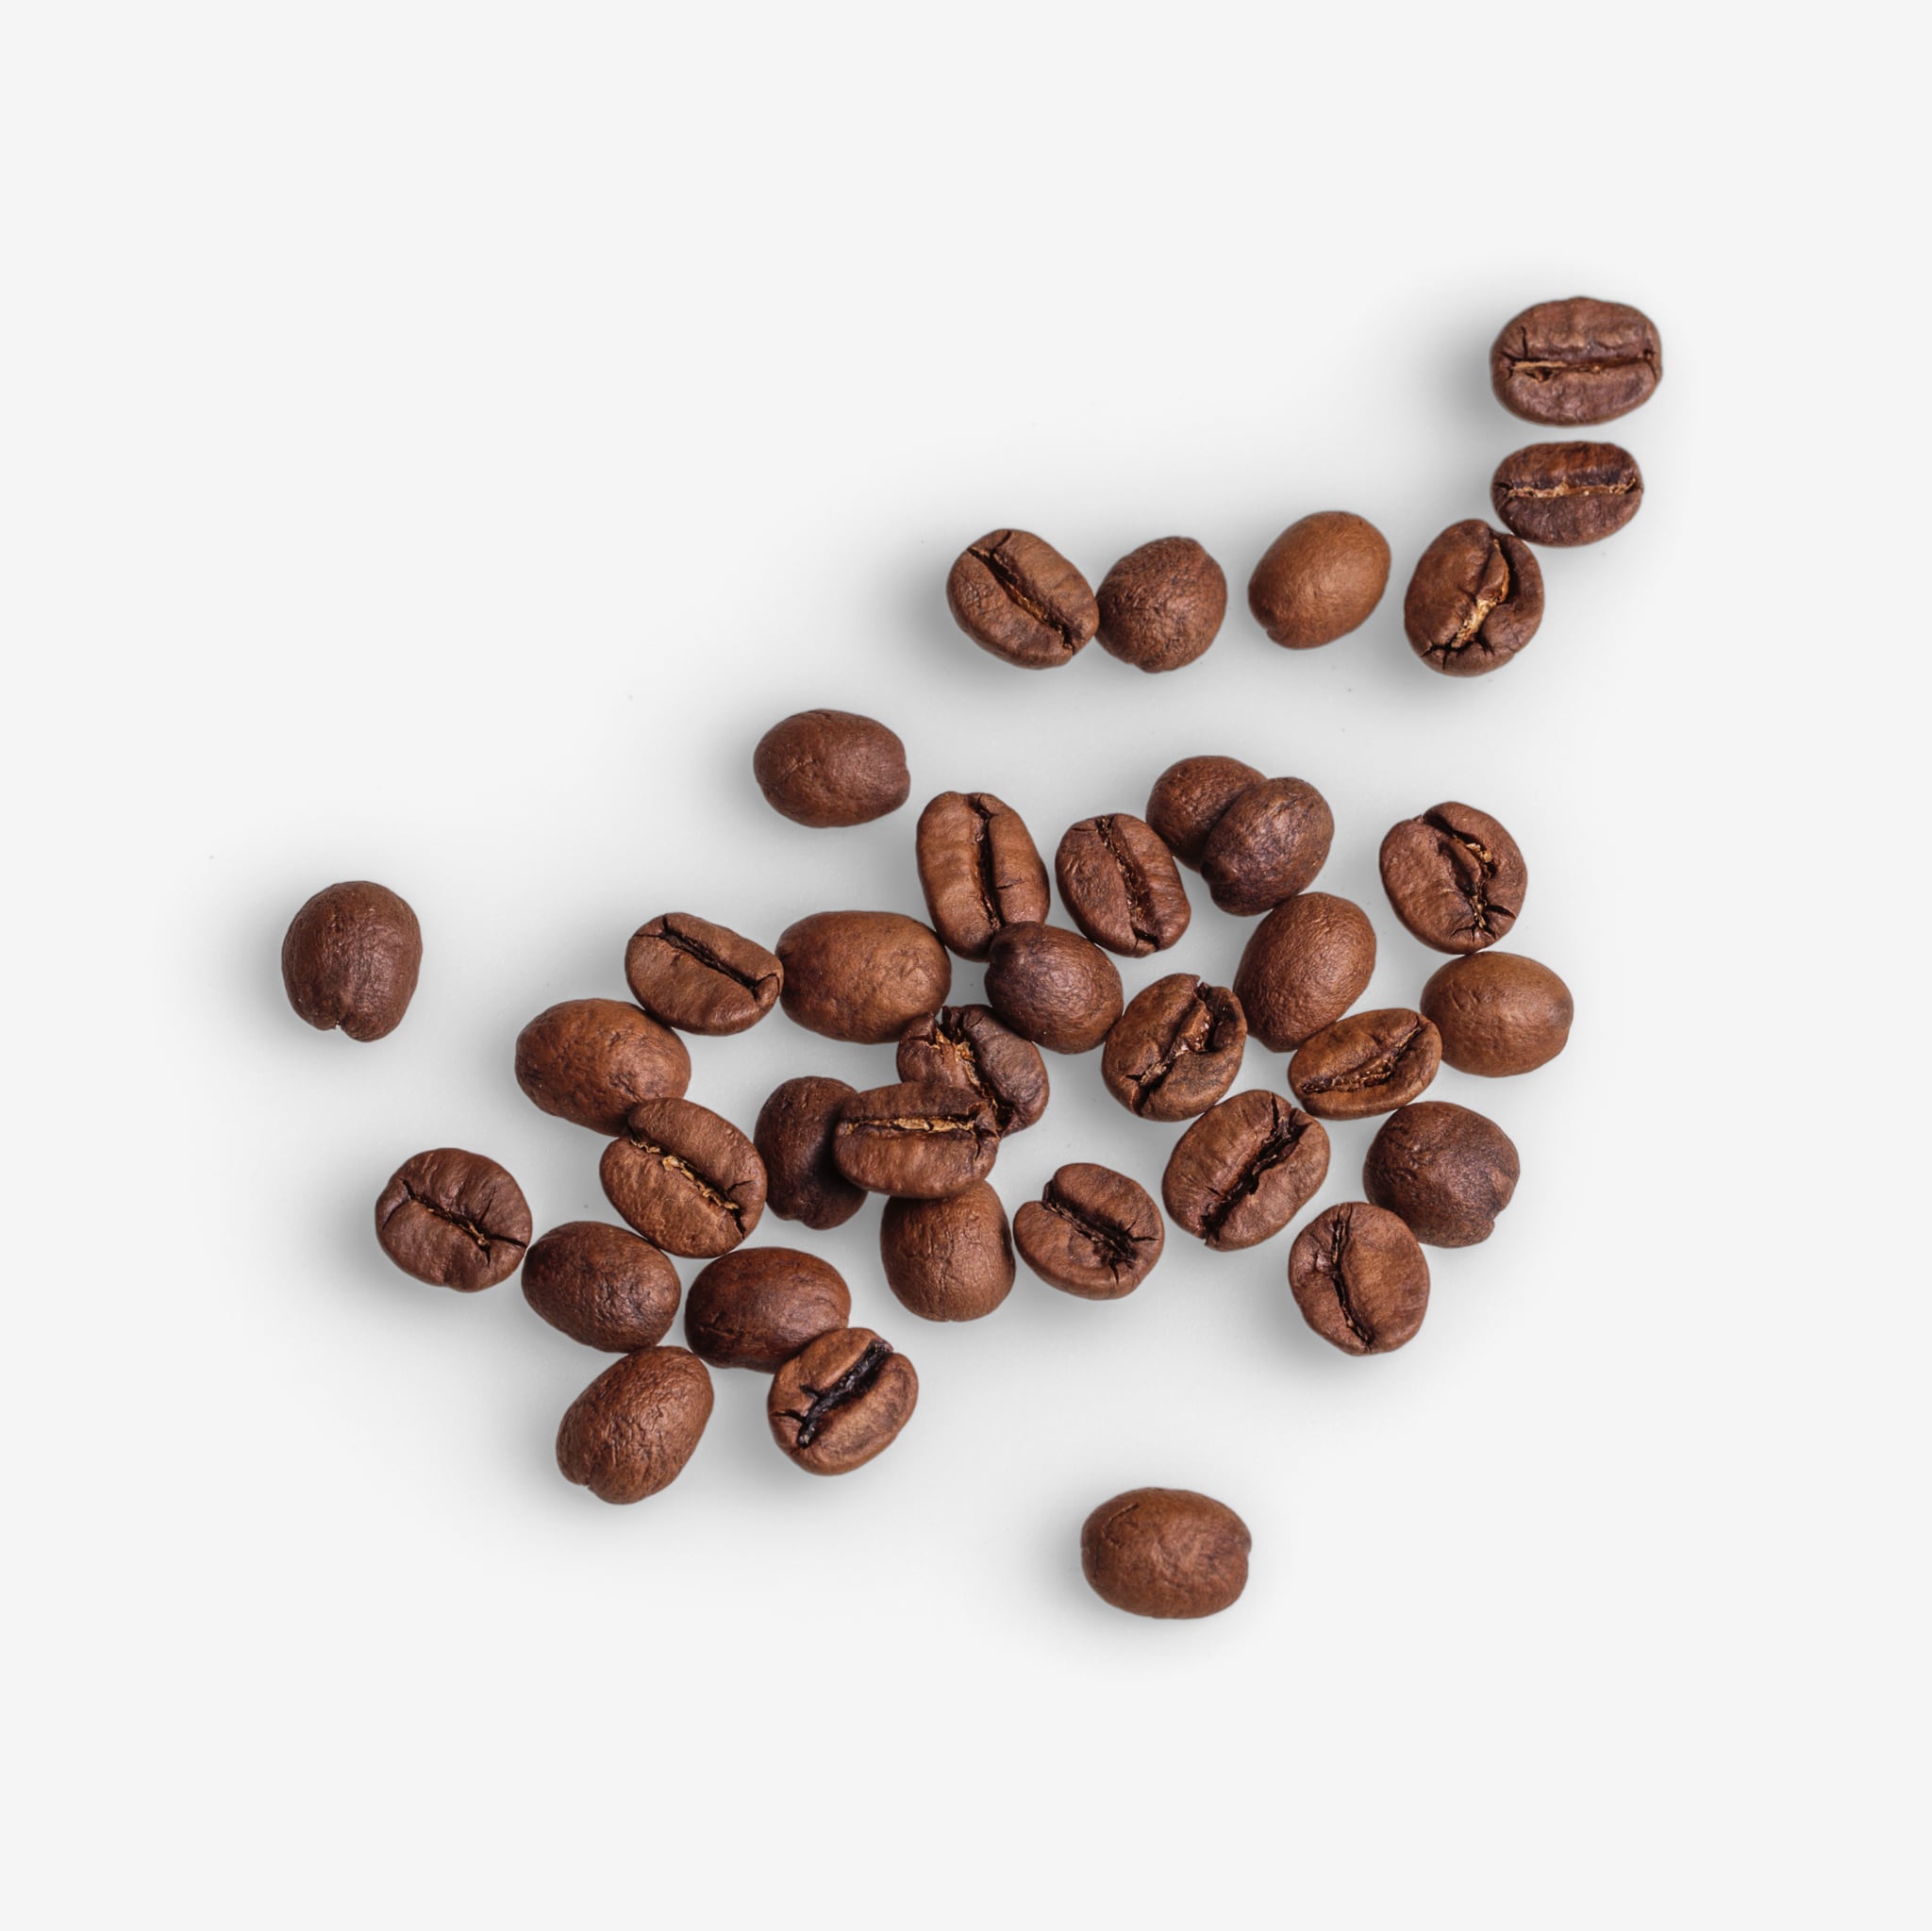 Coffee PSD isolated image